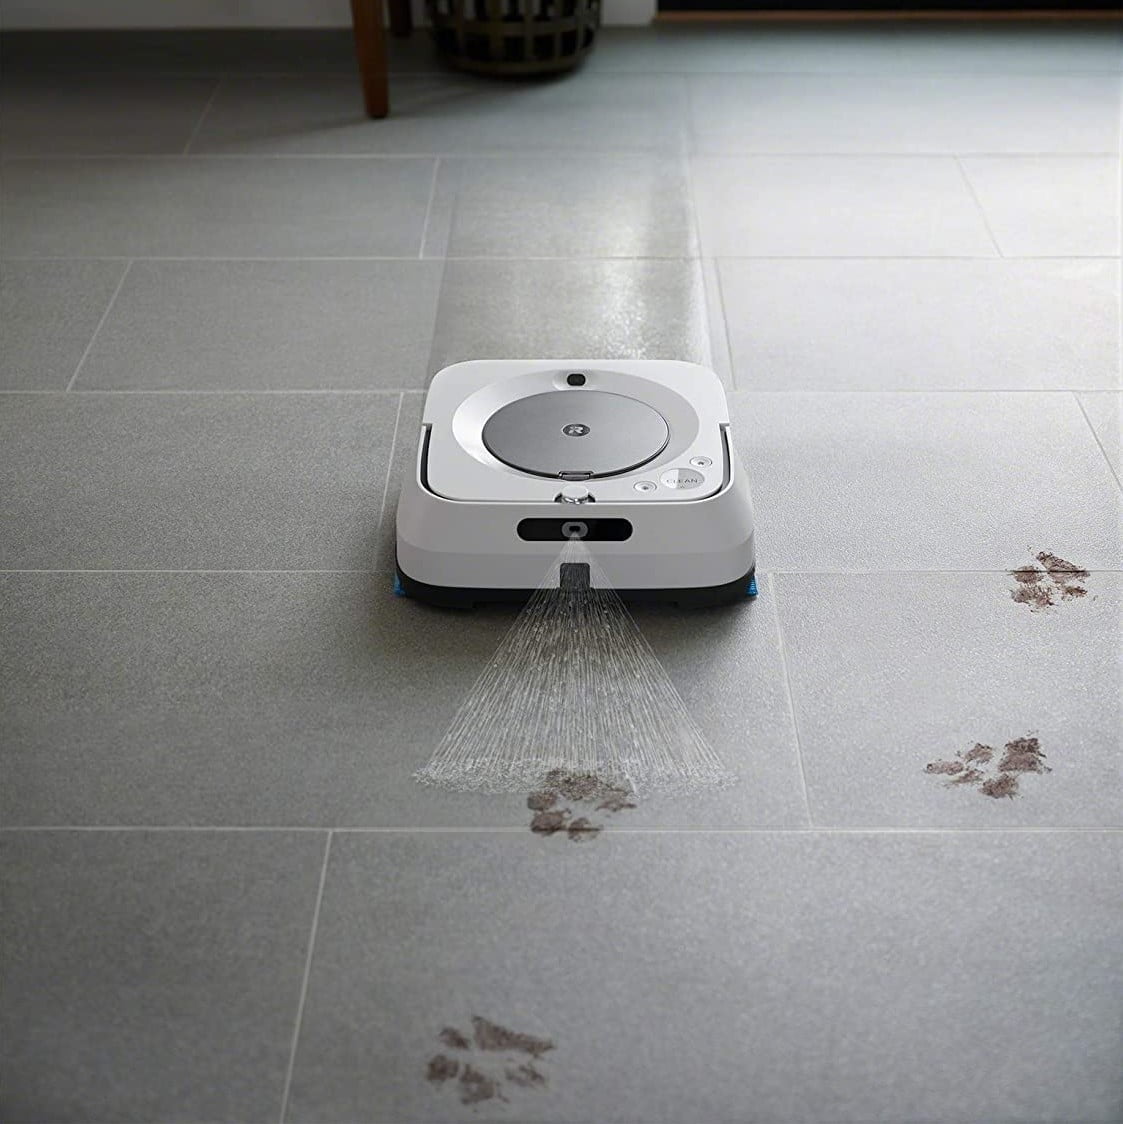 71Eagqqzogl. Ac Sl1500 Irobot &Lt;H1&Gt;Irobot Braava Jet M6 Robot Mop - M613840&Lt;/H1&Gt; Https://Www.youtube.com/Watch?V=Ymk_2Jp_Edc * Irobot Braava M6 Robot Mopping * Navigation: Cliff Detect To Avoids Stairs, Navigates Under And Around Furniture, Navigates In Neat Rows, * Smart Features: App Controlled, Work With Voice Command, Compatible With Alexa,Google,Ali Genie3 * Cleaning Features:specialized Corner Clean. * Smart Recharge And Resume Feature: When Battery Gets Low, The Robot Finds Its Base &Amp; Completely Recharges, Then Resumes Cleaning Where It Left Off. * Customization Features: Personalized Schedule Recommendations, Creates Favorite Cleaning Routines, Pet-Shedding Cleaning Suggestions, * Mopping Features: Vacuums Then Mops In Sequence: Imprint® Link Technology Lets Roomba® Robot Vacuum And Braava Jet® M6 Robot Mop Team Up To Vacuum, Then Mop Automatically In Perfect Sequence, * Adjustable Spray Level: Customize Your Robot'S Spray Level In The Irobot Home App.,Precision Jet Spray. Mopping Modes 2, * Mops Back And Forth Like You Would: Specially Designed To Mop Back-And-Forth Just Like You Would. Works With Single Use And Washable Pads &Lt;Pre&Gt;Warranty: 2 Years On Robot, 1 Year On Battery&Lt;/Pre&Gt; Irobot Braava Jet M6 Irobot Braava Jet M6 Robot Mop - M613840